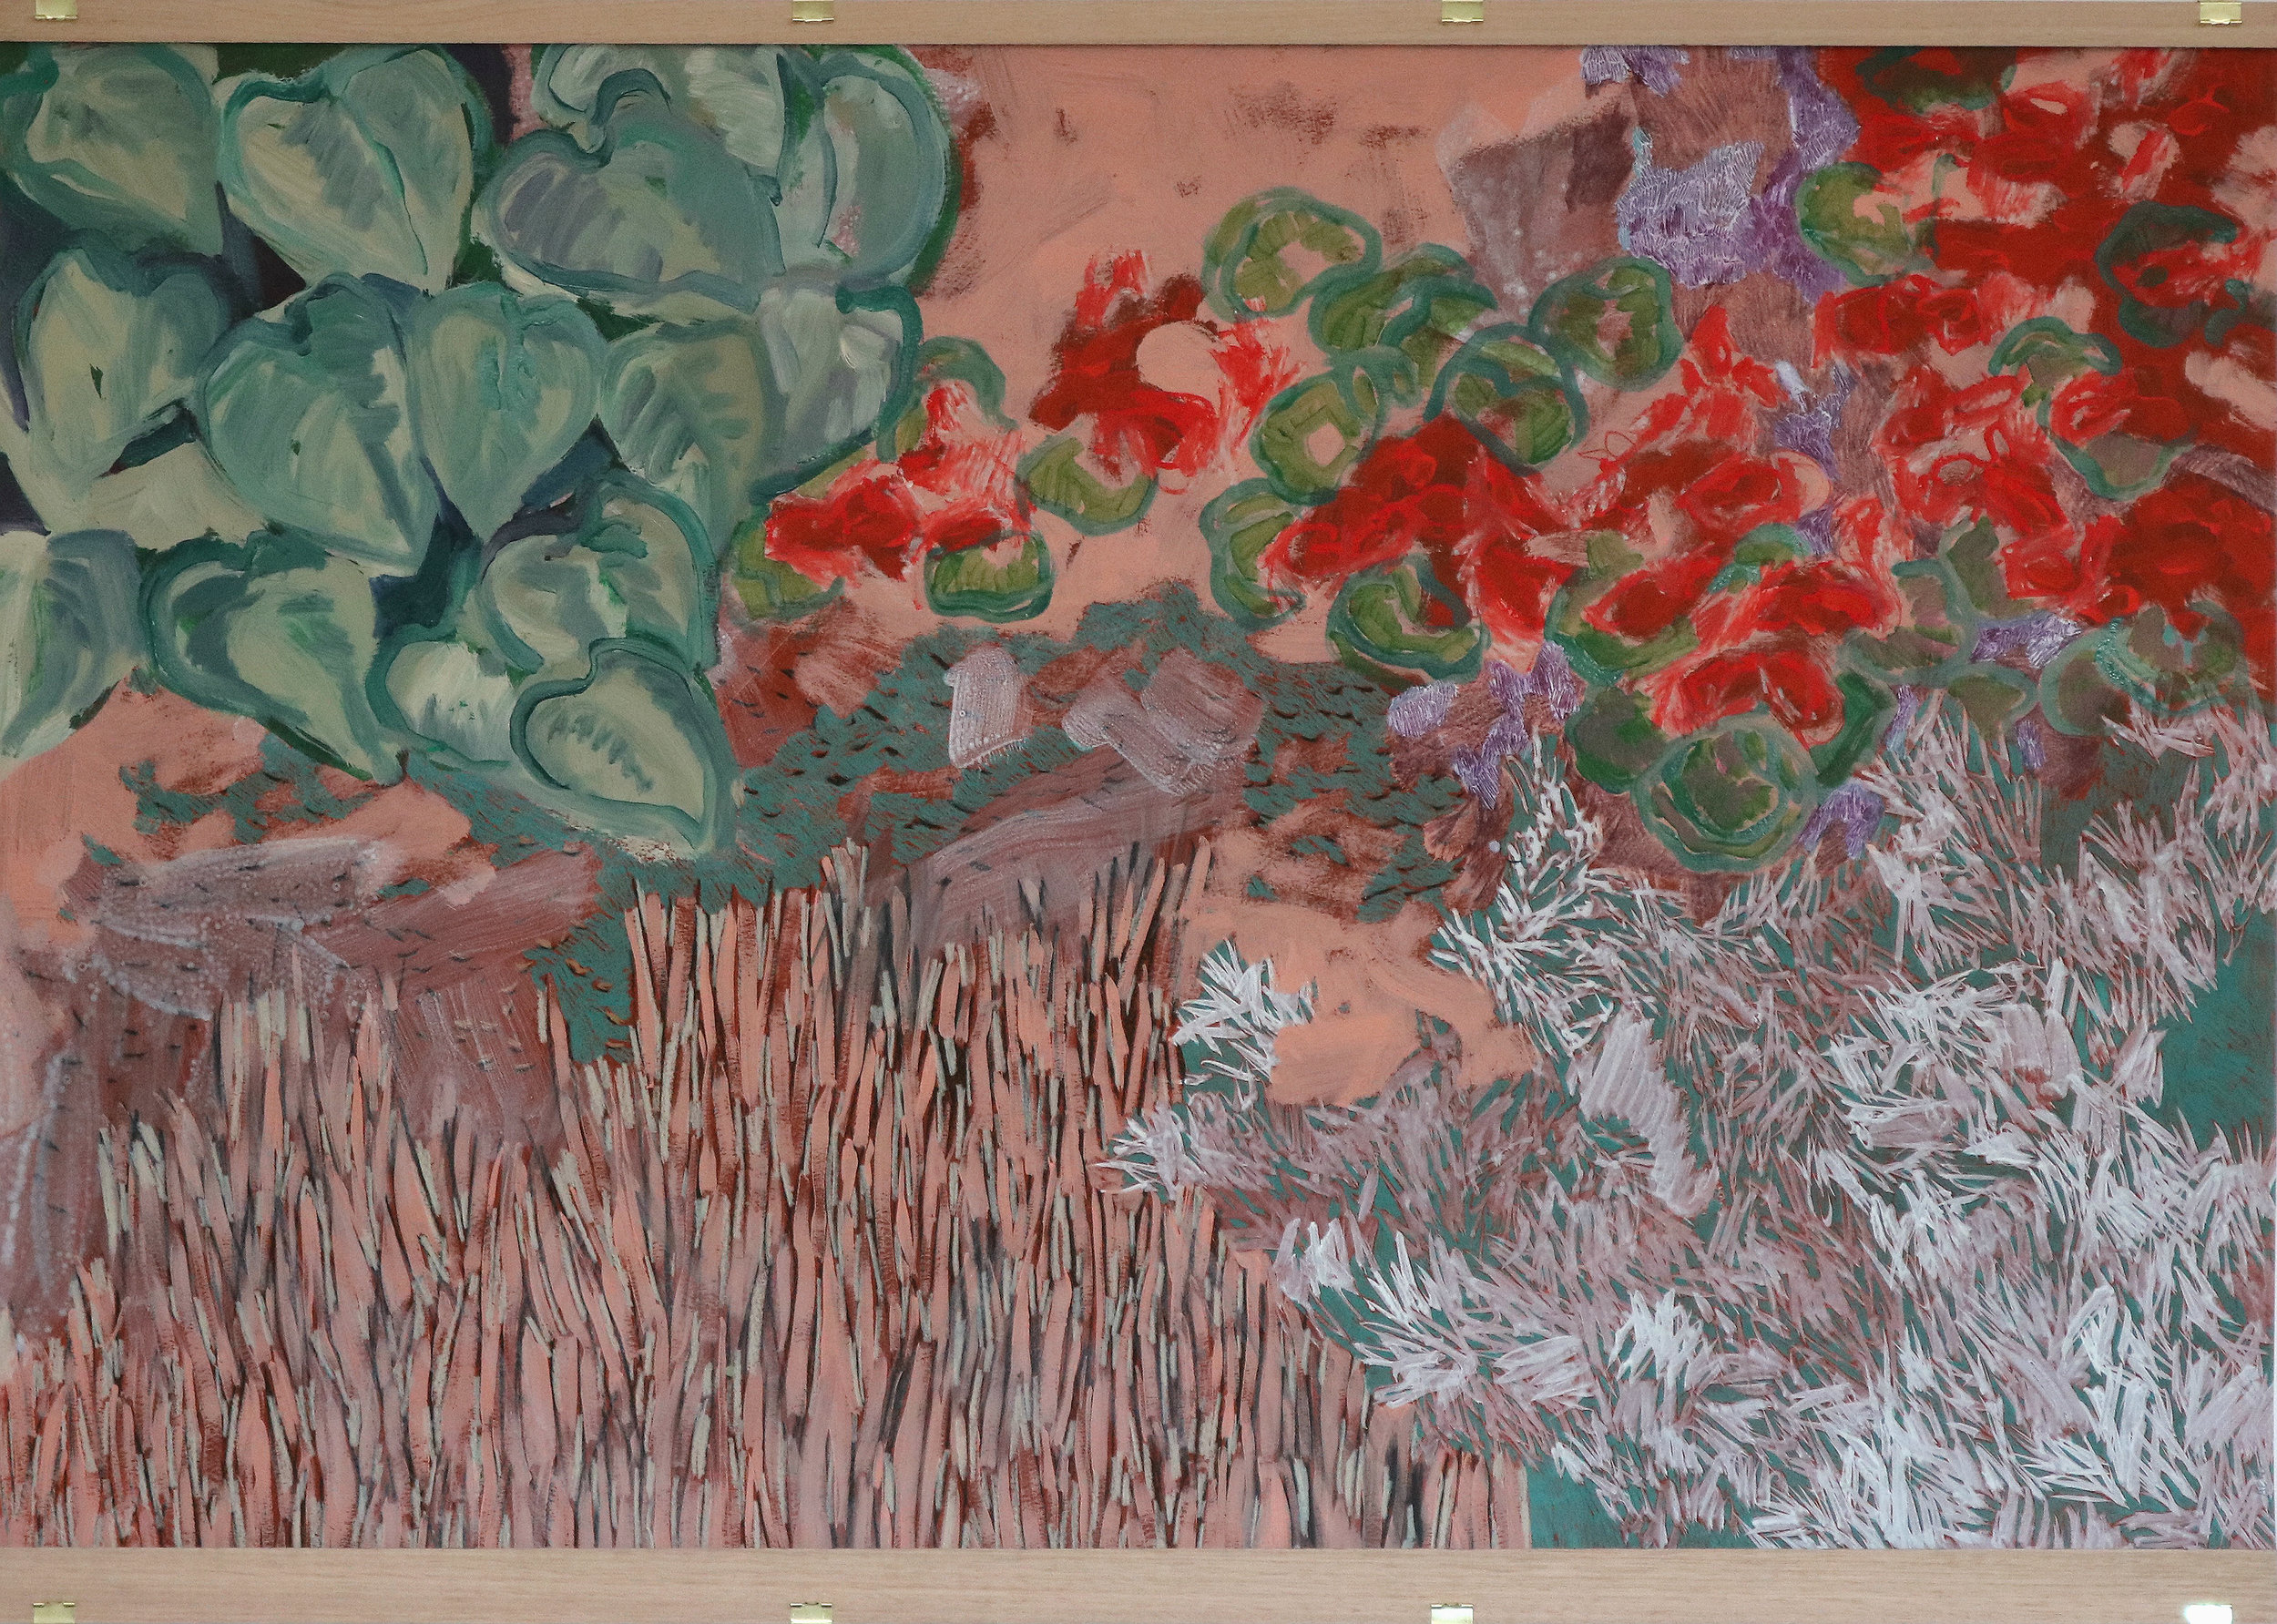   Rampant Geranium (With Groundcover)  Mixed media on Canson Montval Paper (300gsm). 106cm x 75cm. 2018. Unframed. Available  here  